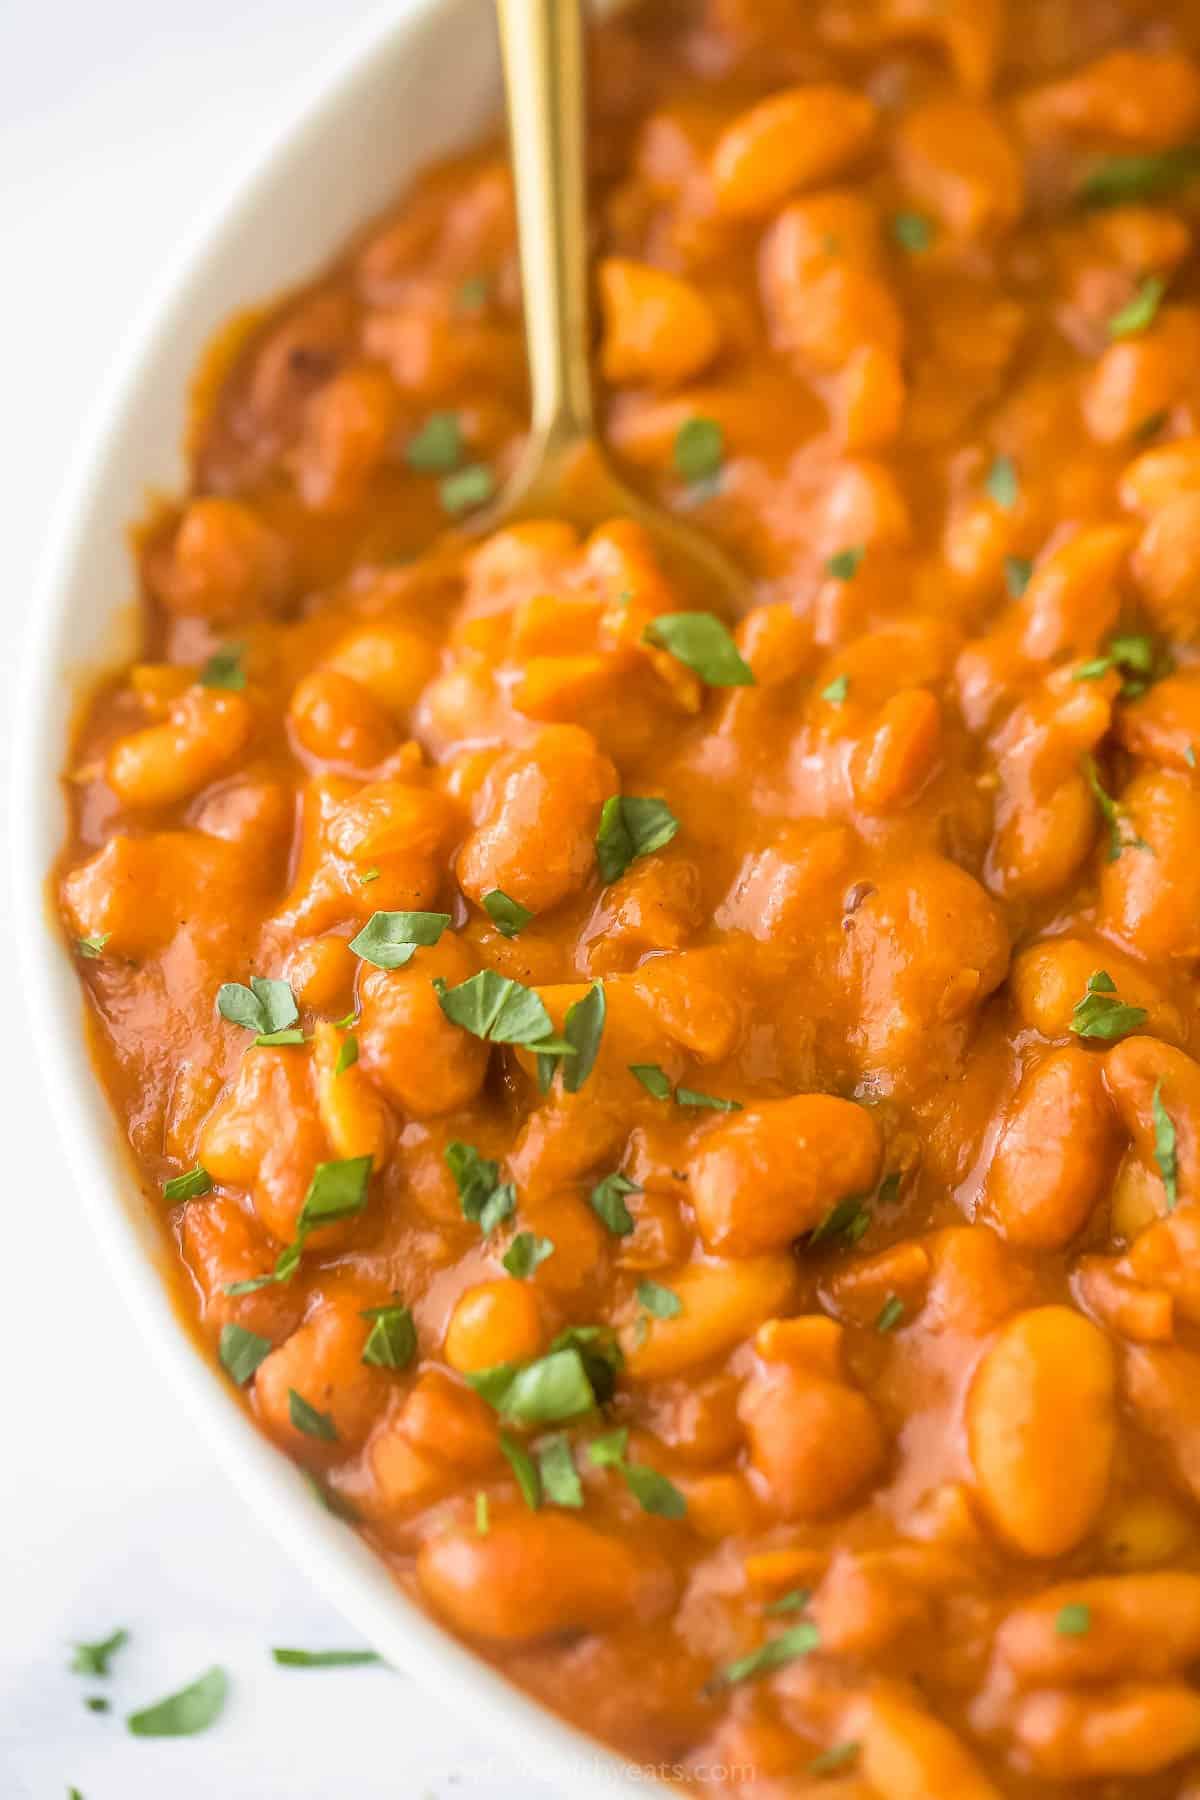 A close-up shot of homemade baked beans garnished with fresh chopped parsley